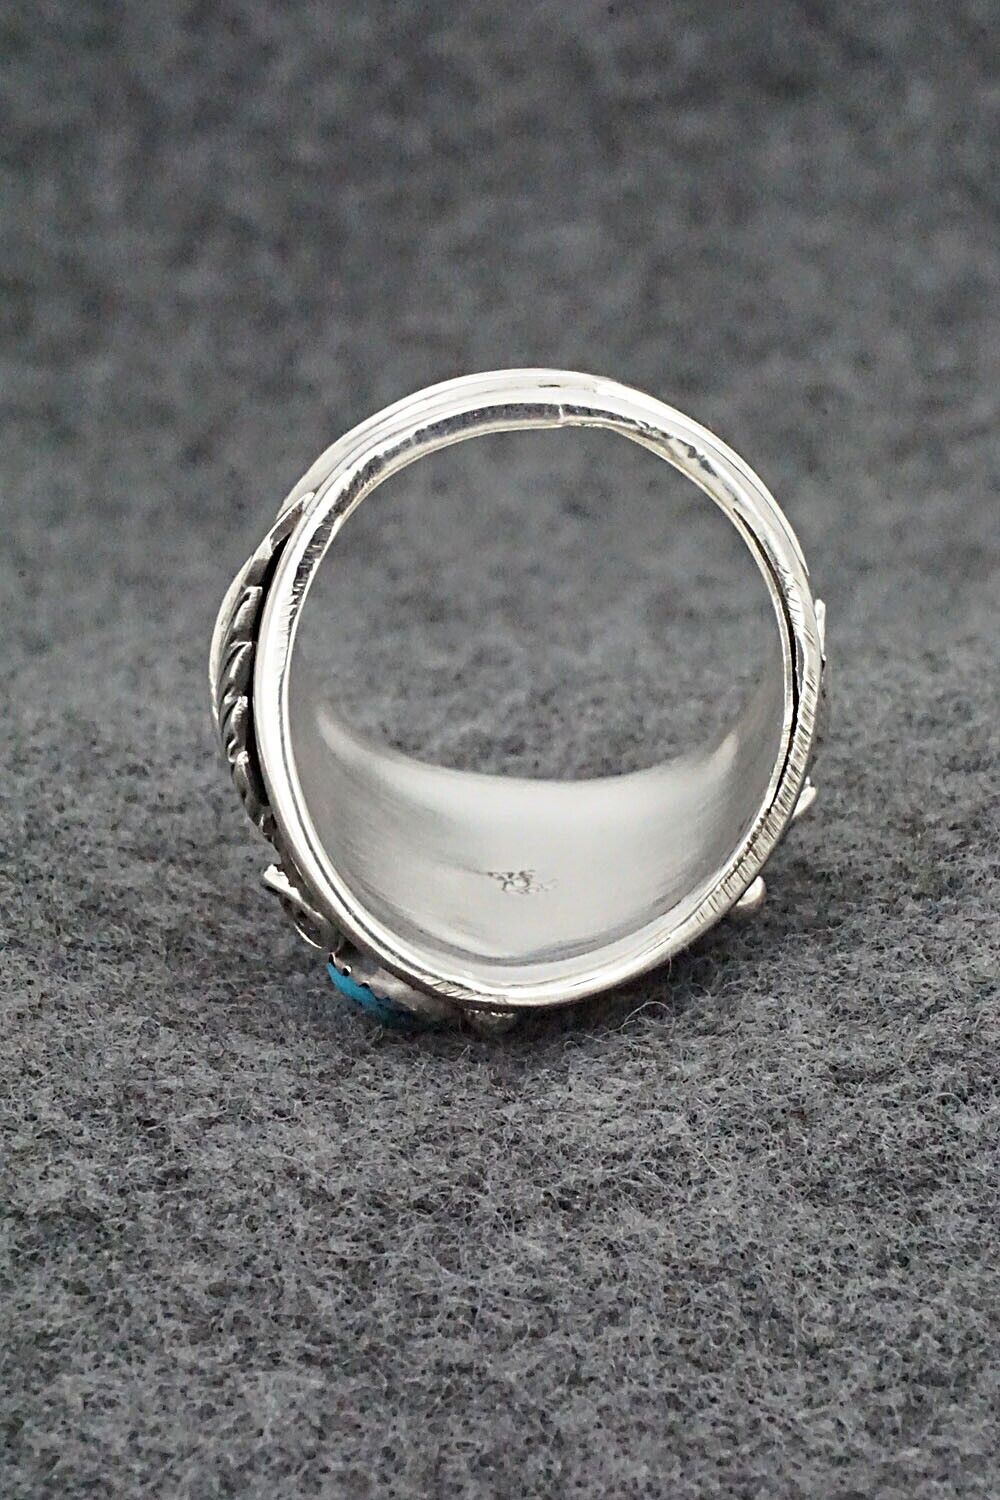 Turquoise & Sterling Silver Ring - Jeannette Saunders - Size 12.5